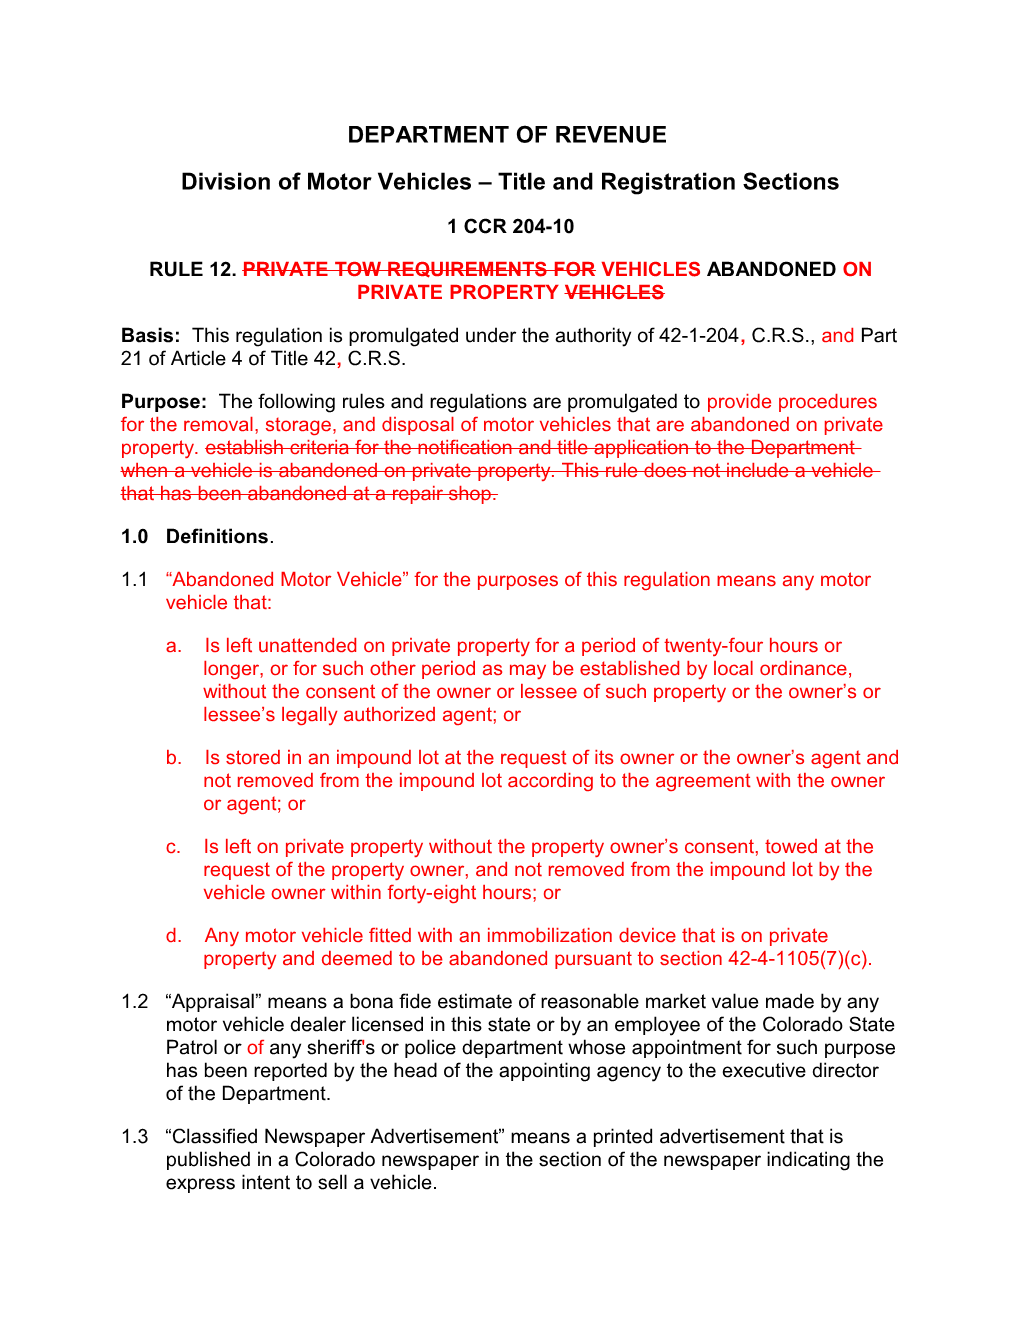 Division of Motor Vehicles Title and Registration Sections s1